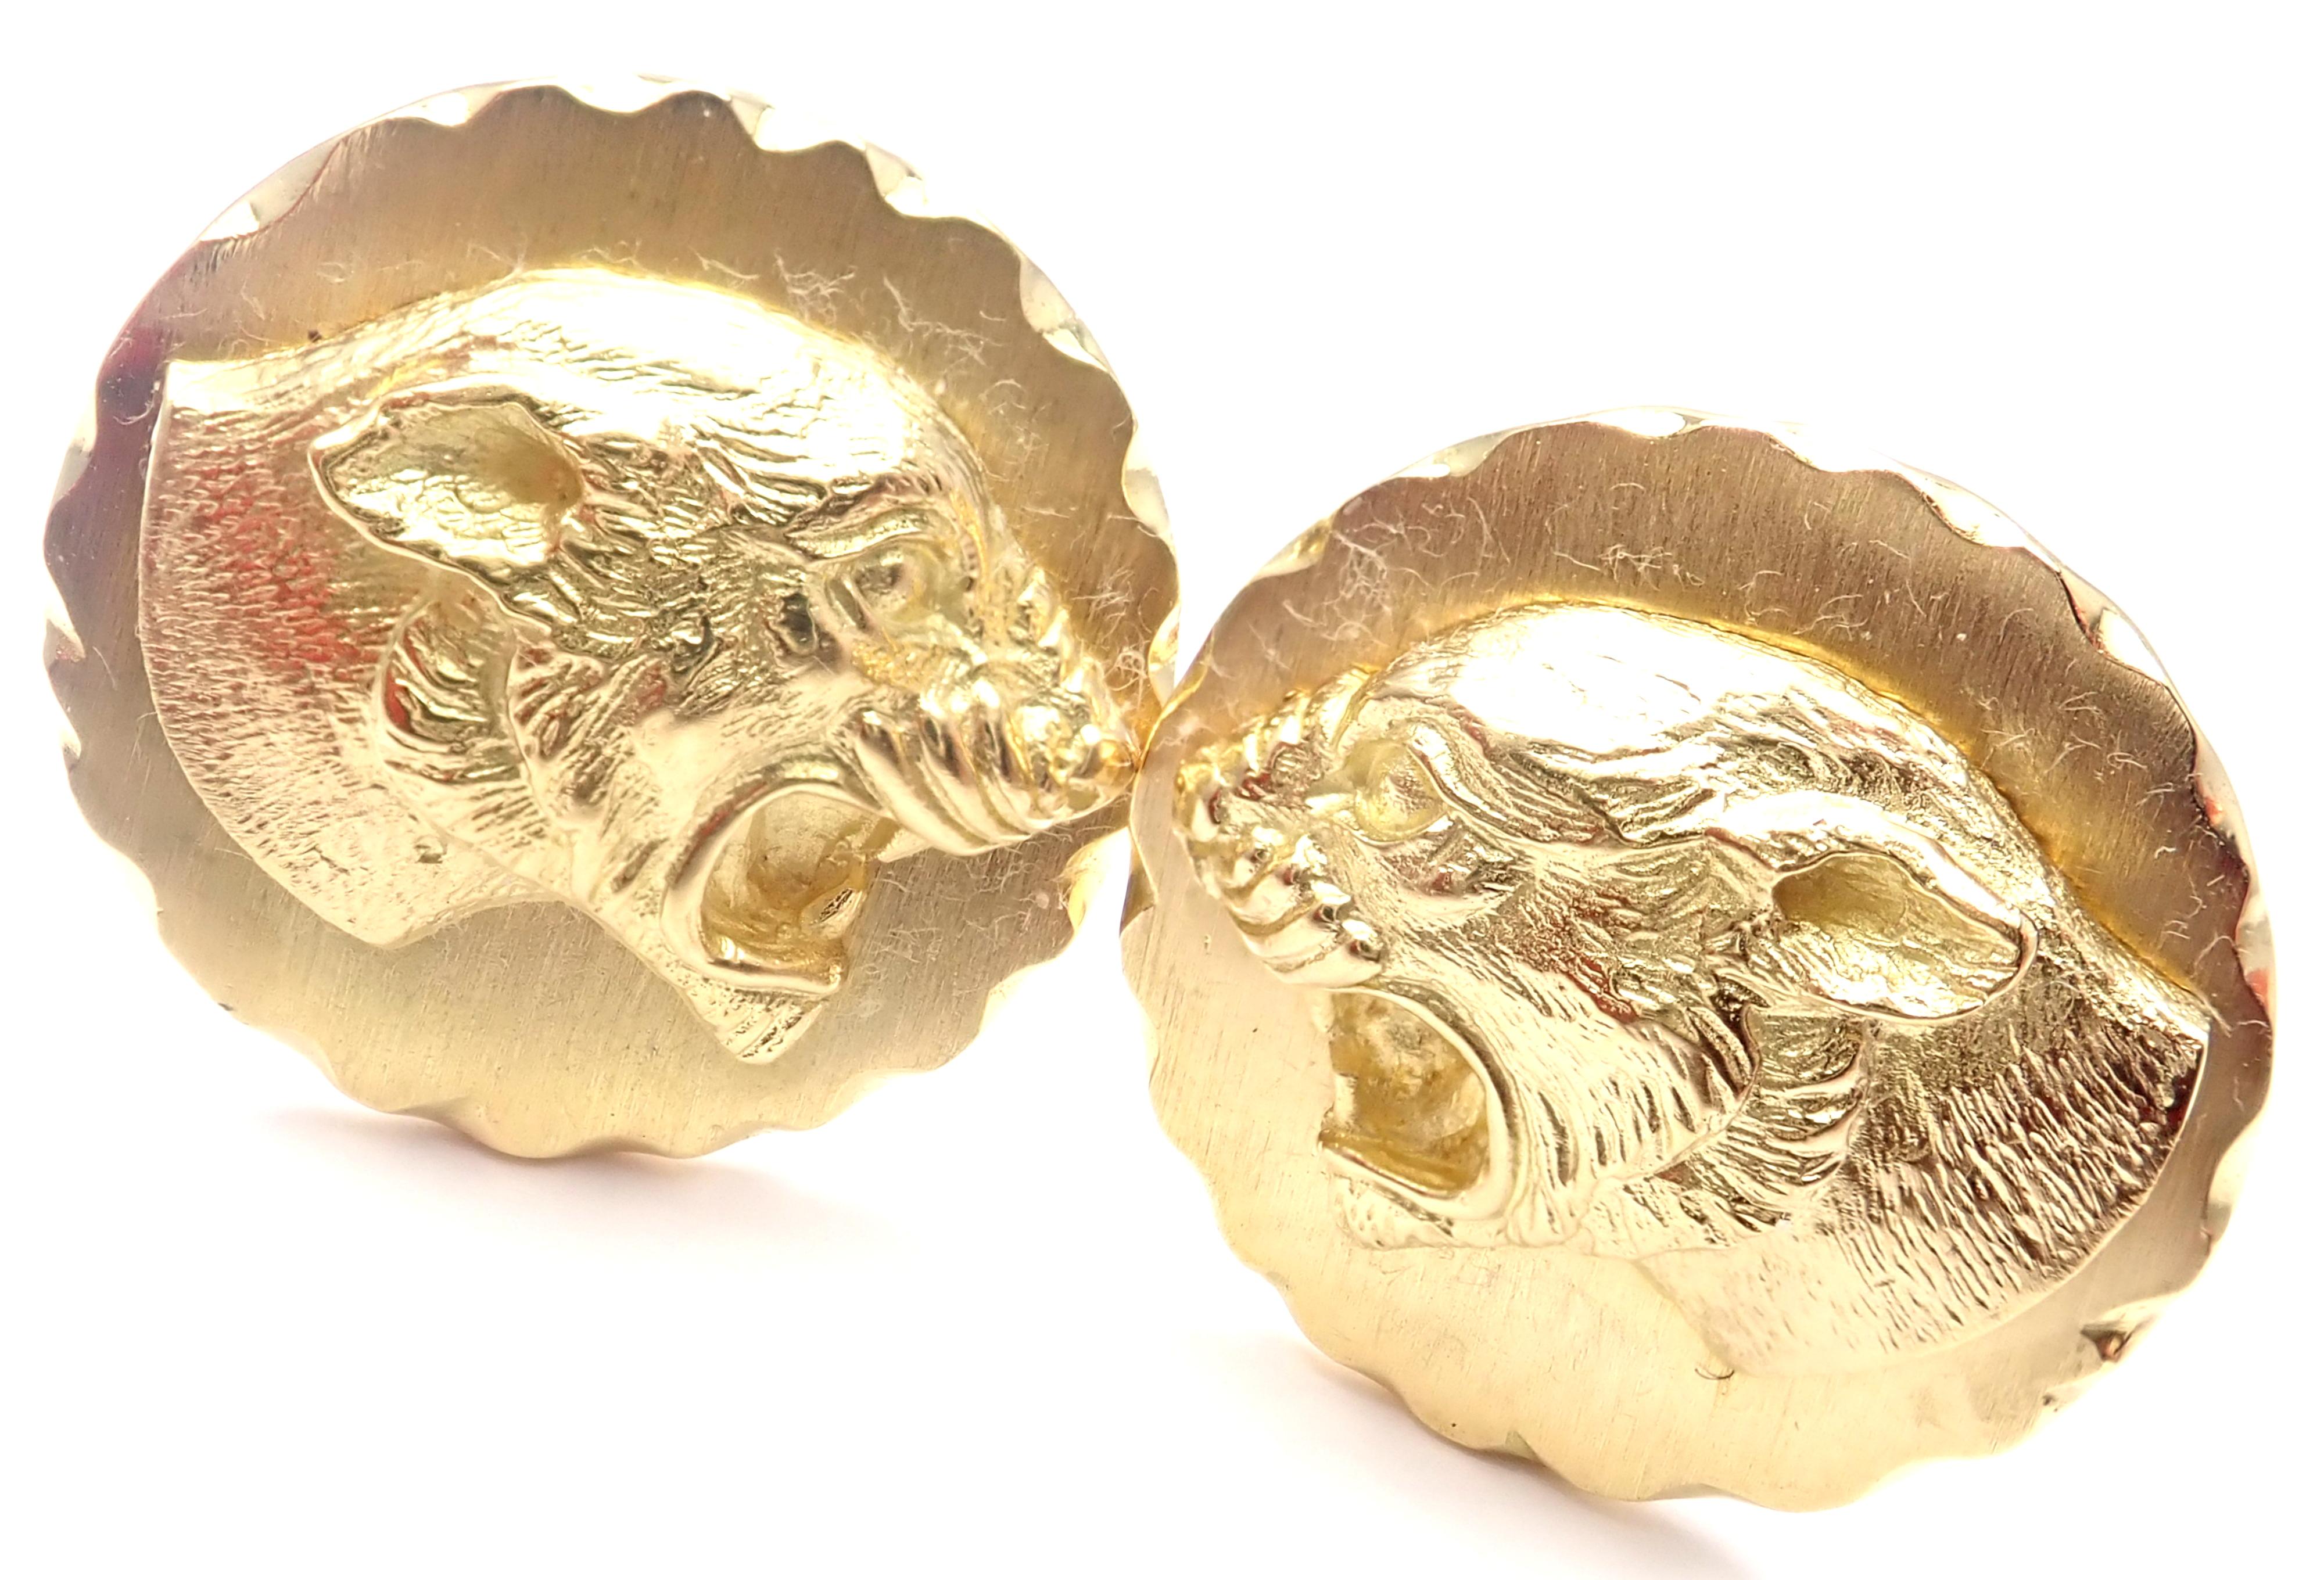 18k Yellow Gold Panther Panthere Cufflinks by Van Cleef & Arpels.
Details:
Measurements: 20mm x 24mm x 13mm
Weight: 20.2 grams
Stamped Hallmarks: VCA 18k S.15588 559
*Free Shipping within the United States*
YOUR PRICE: $5,500
T110othd